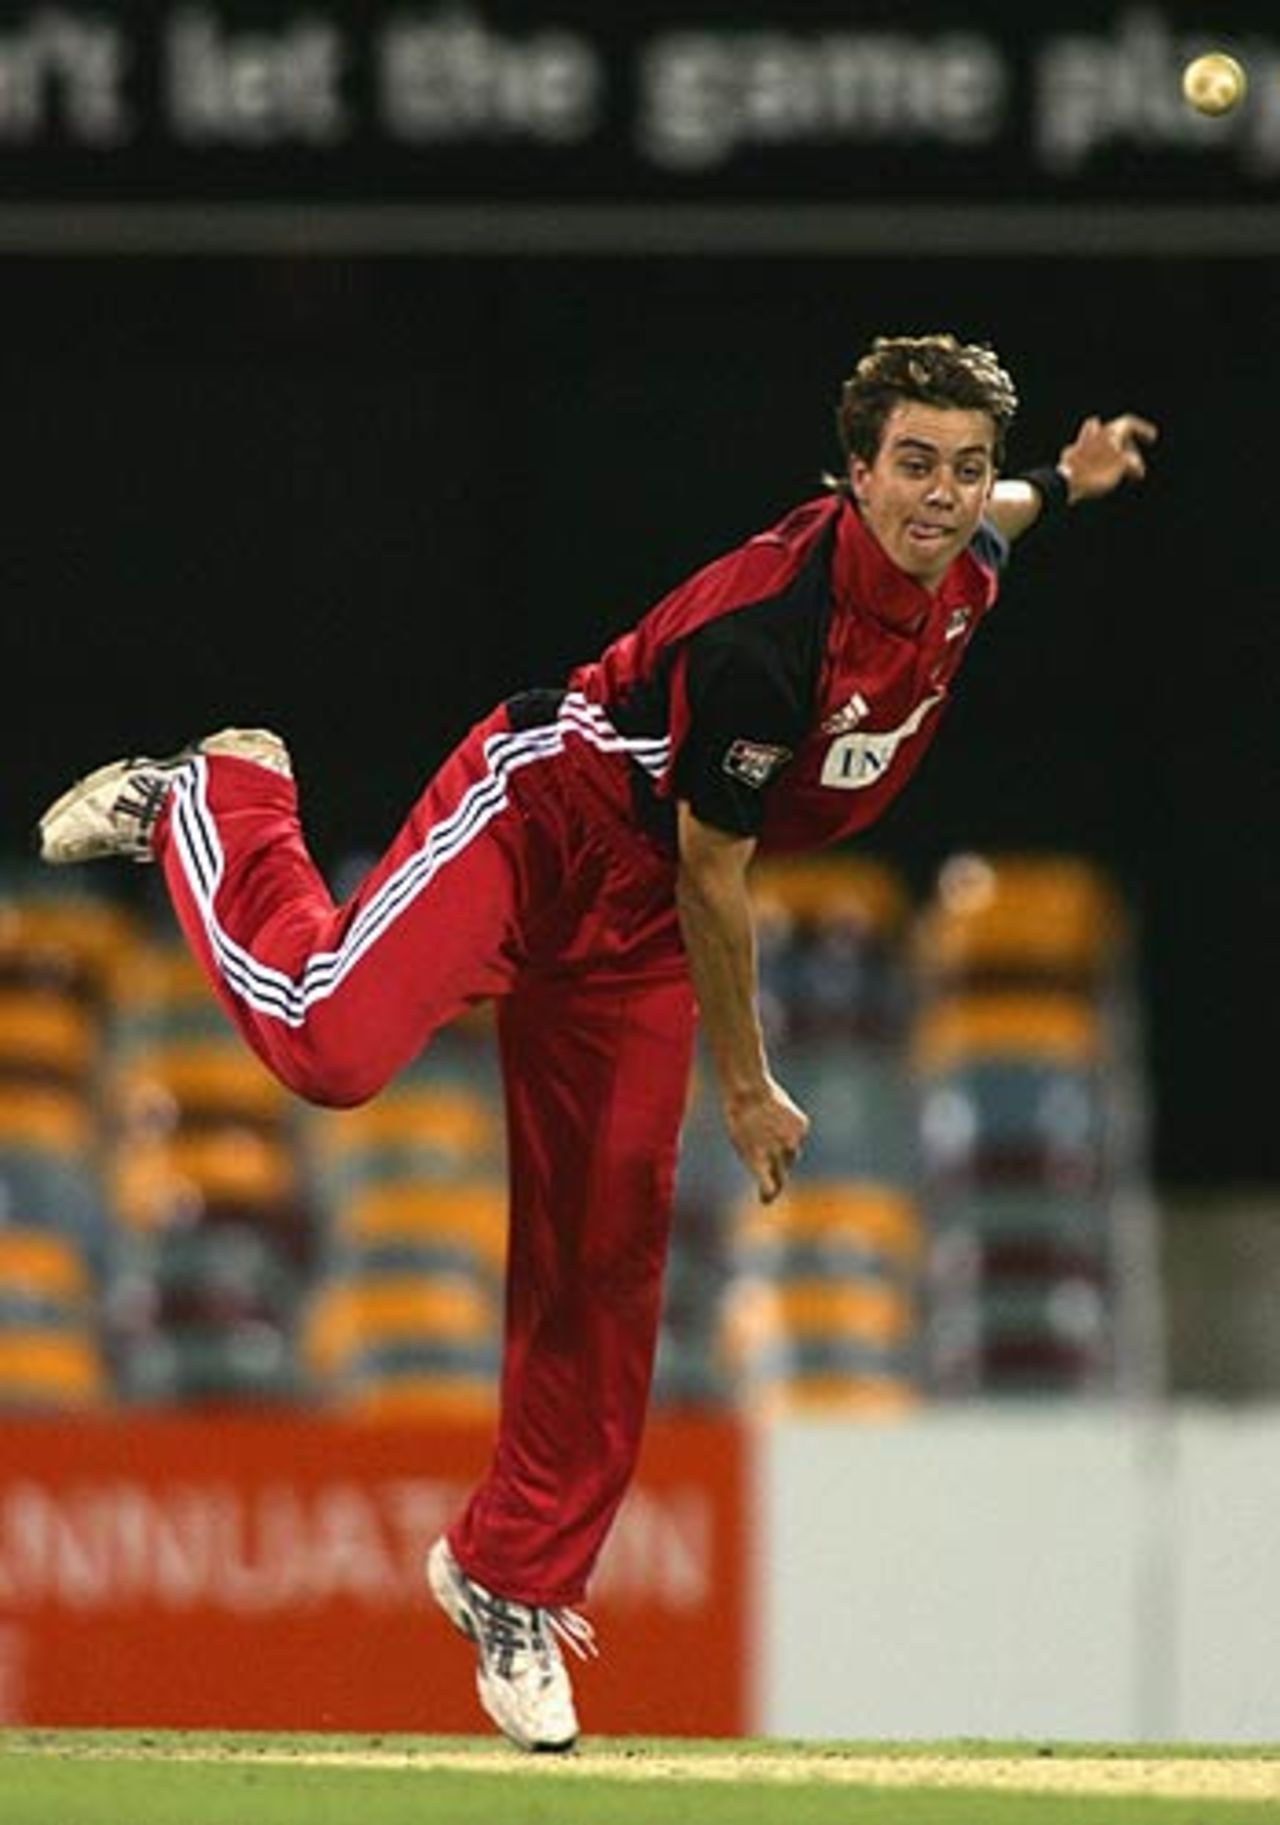 Cullen Bailey in action against Queensland, Queensland v South Australia, ING Cup, Woolloongabba, Brisbane, February 17 2006